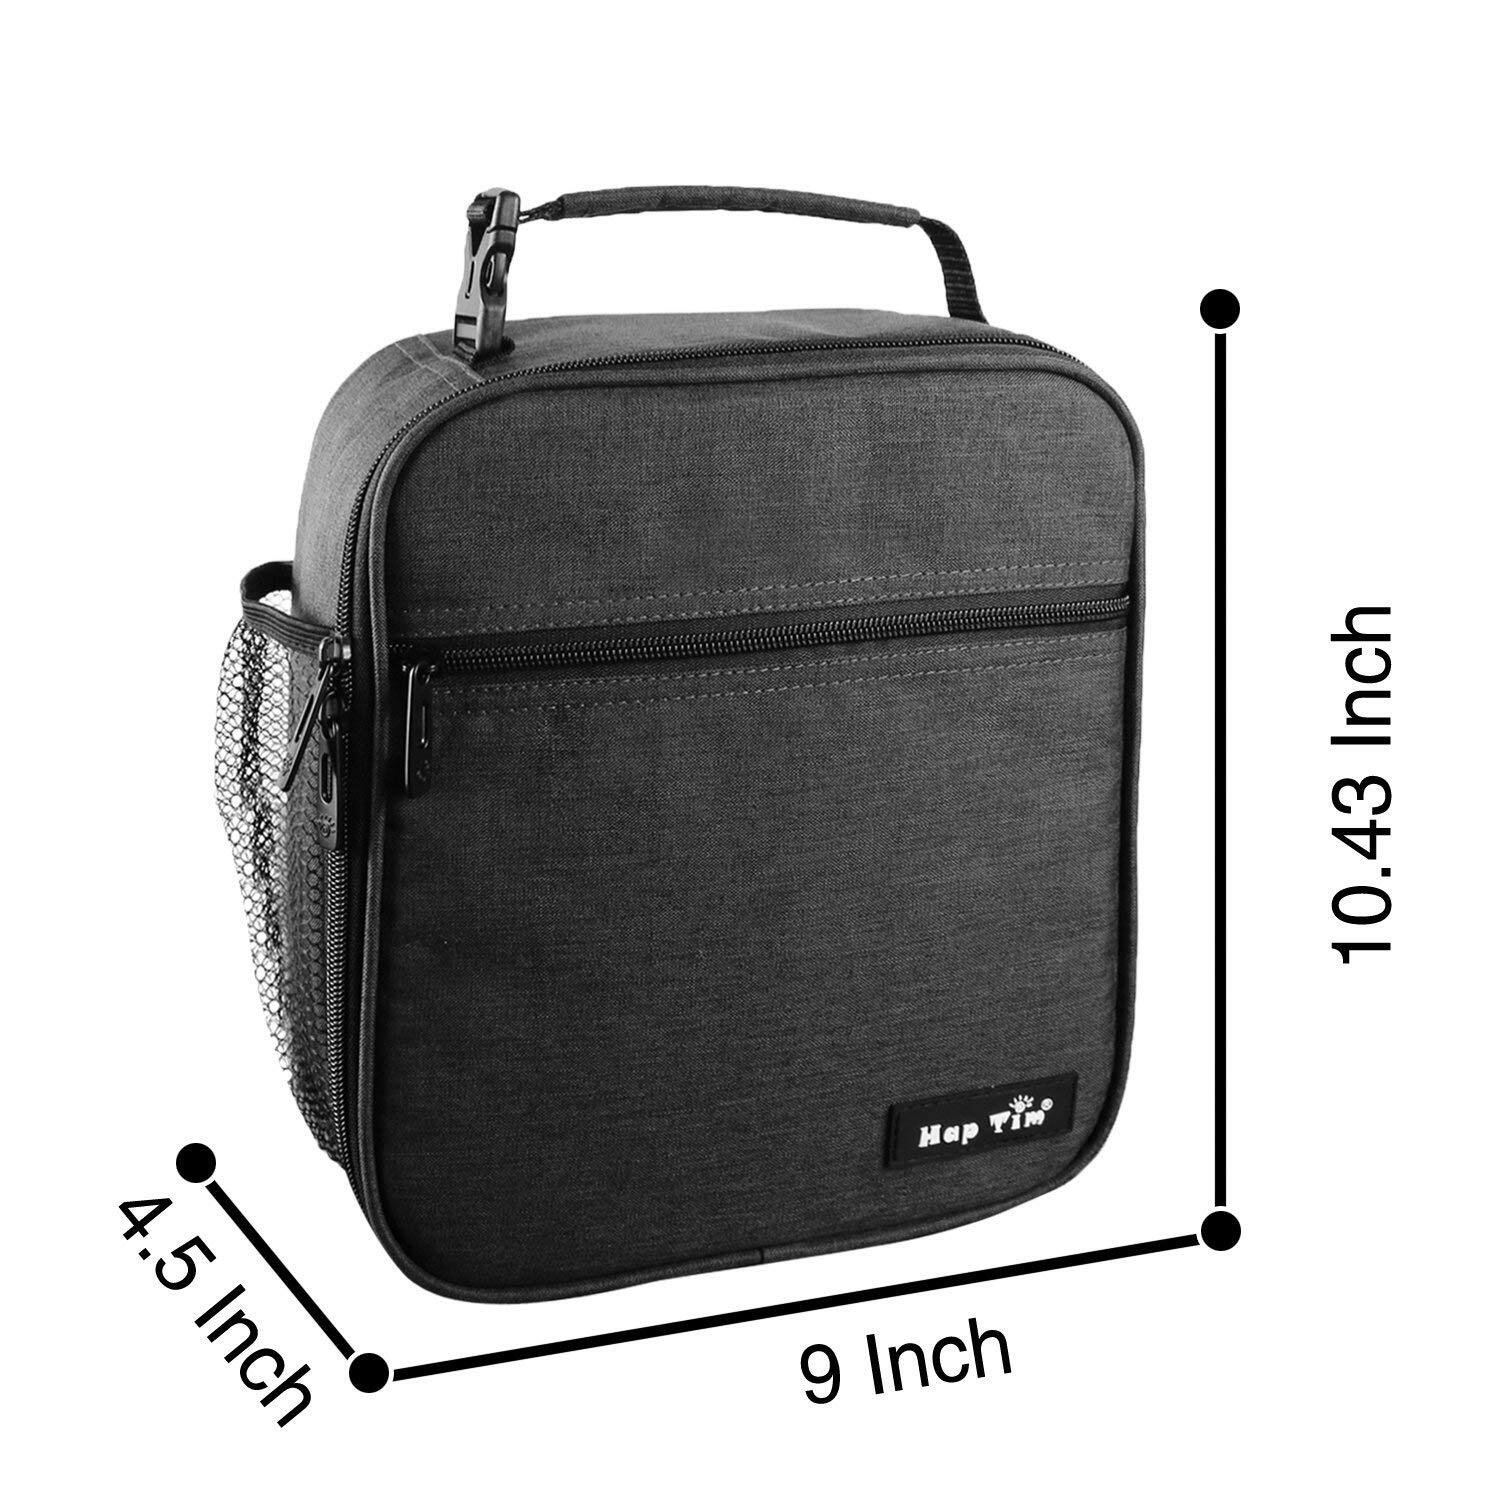 https://images.51microshop.com/1658/product/20180927/Hap_Tim_Insulated_Lunch_Bag_for_Men_Women_Reusable_Lunch_Box_for_Kids_Boys_Spacious_Lunchbox_Adult_18654_DG__1538012716130_6.jpg